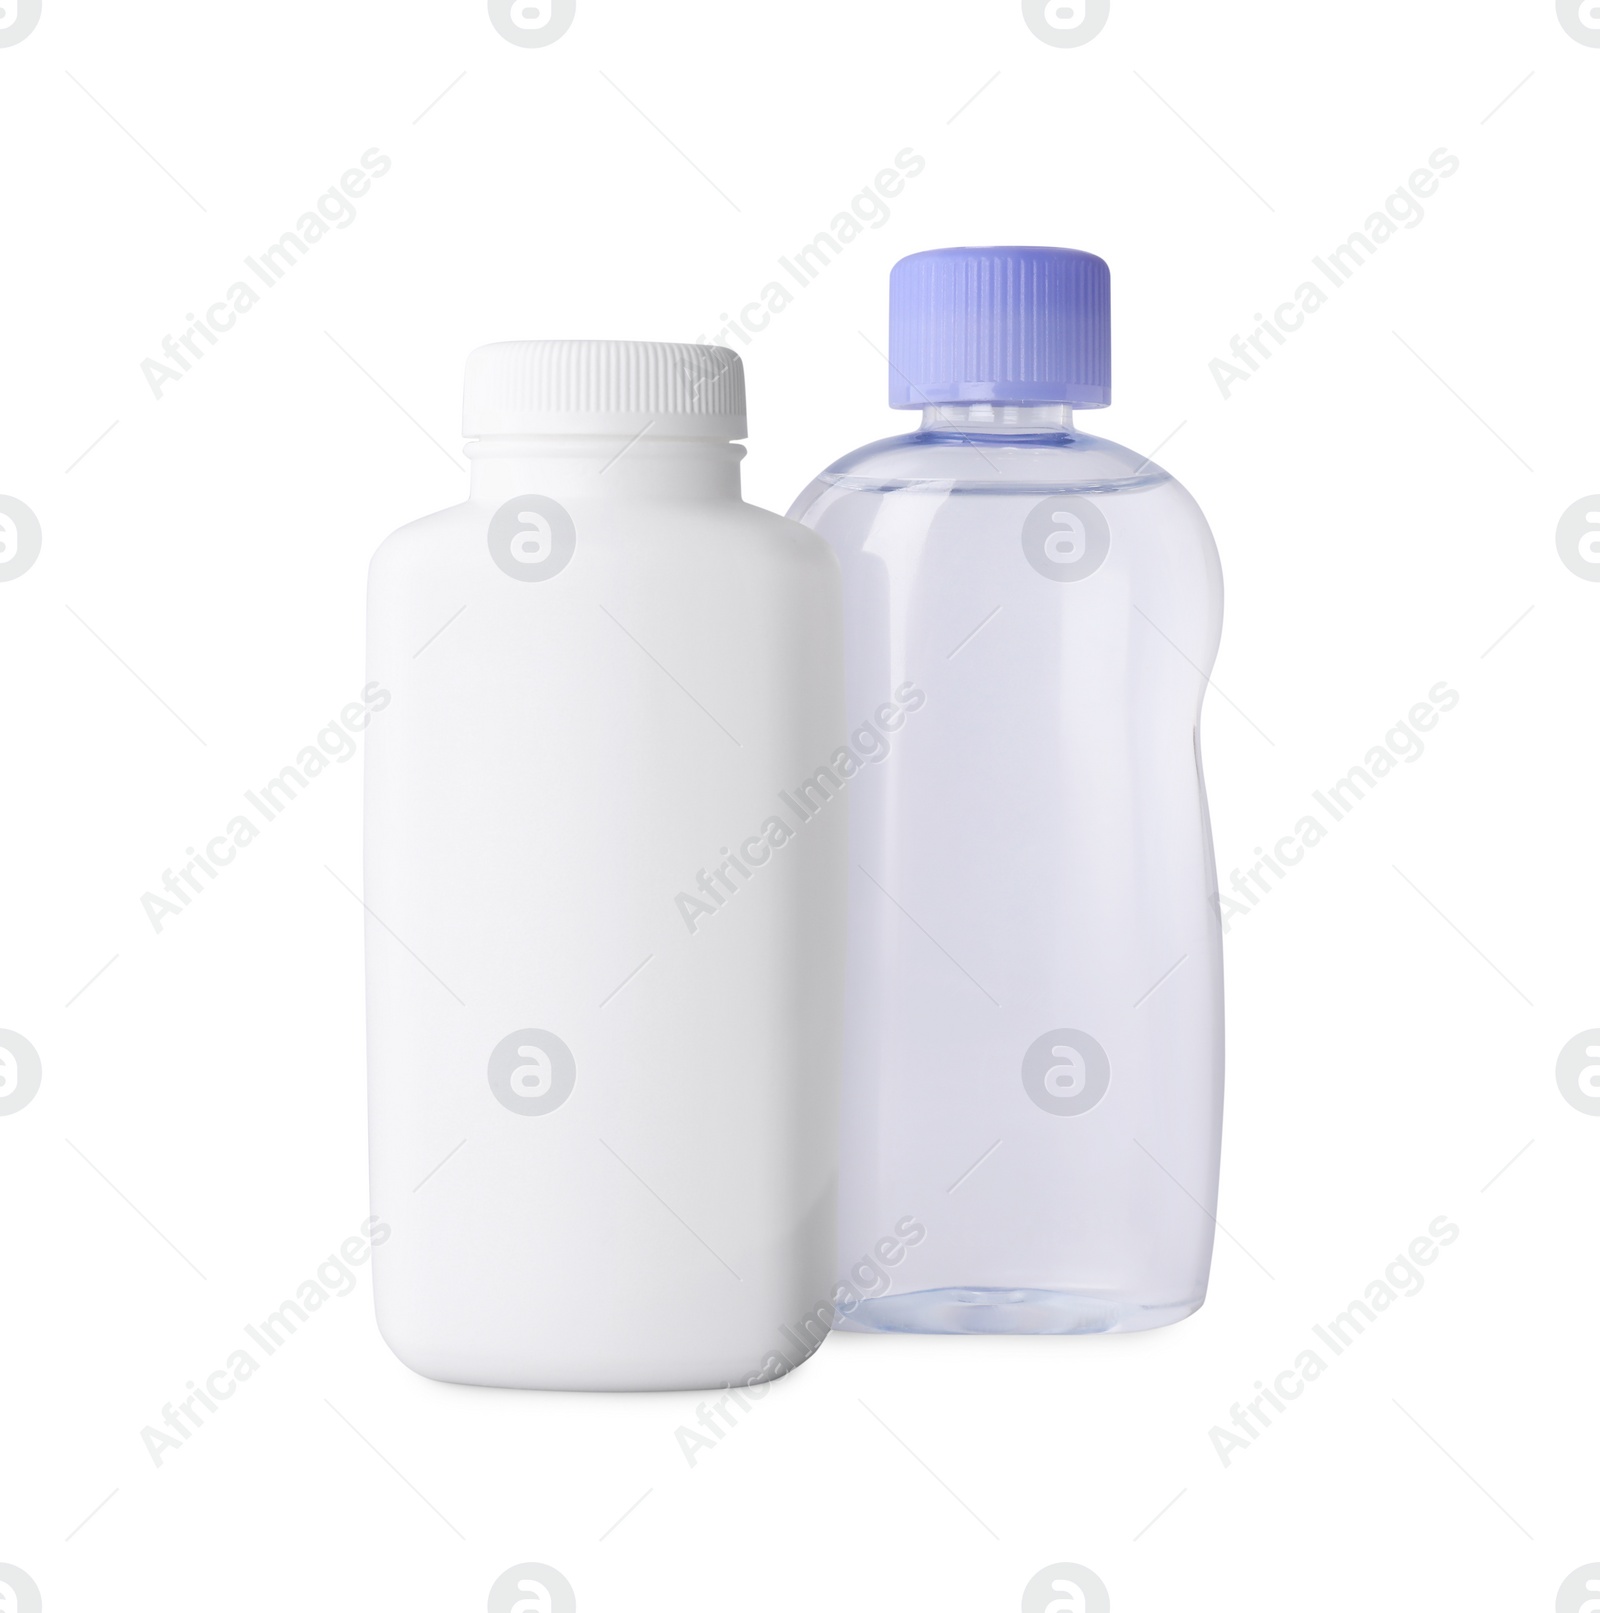 Photo of Blank bottles with baby cosmetic products isolated on white